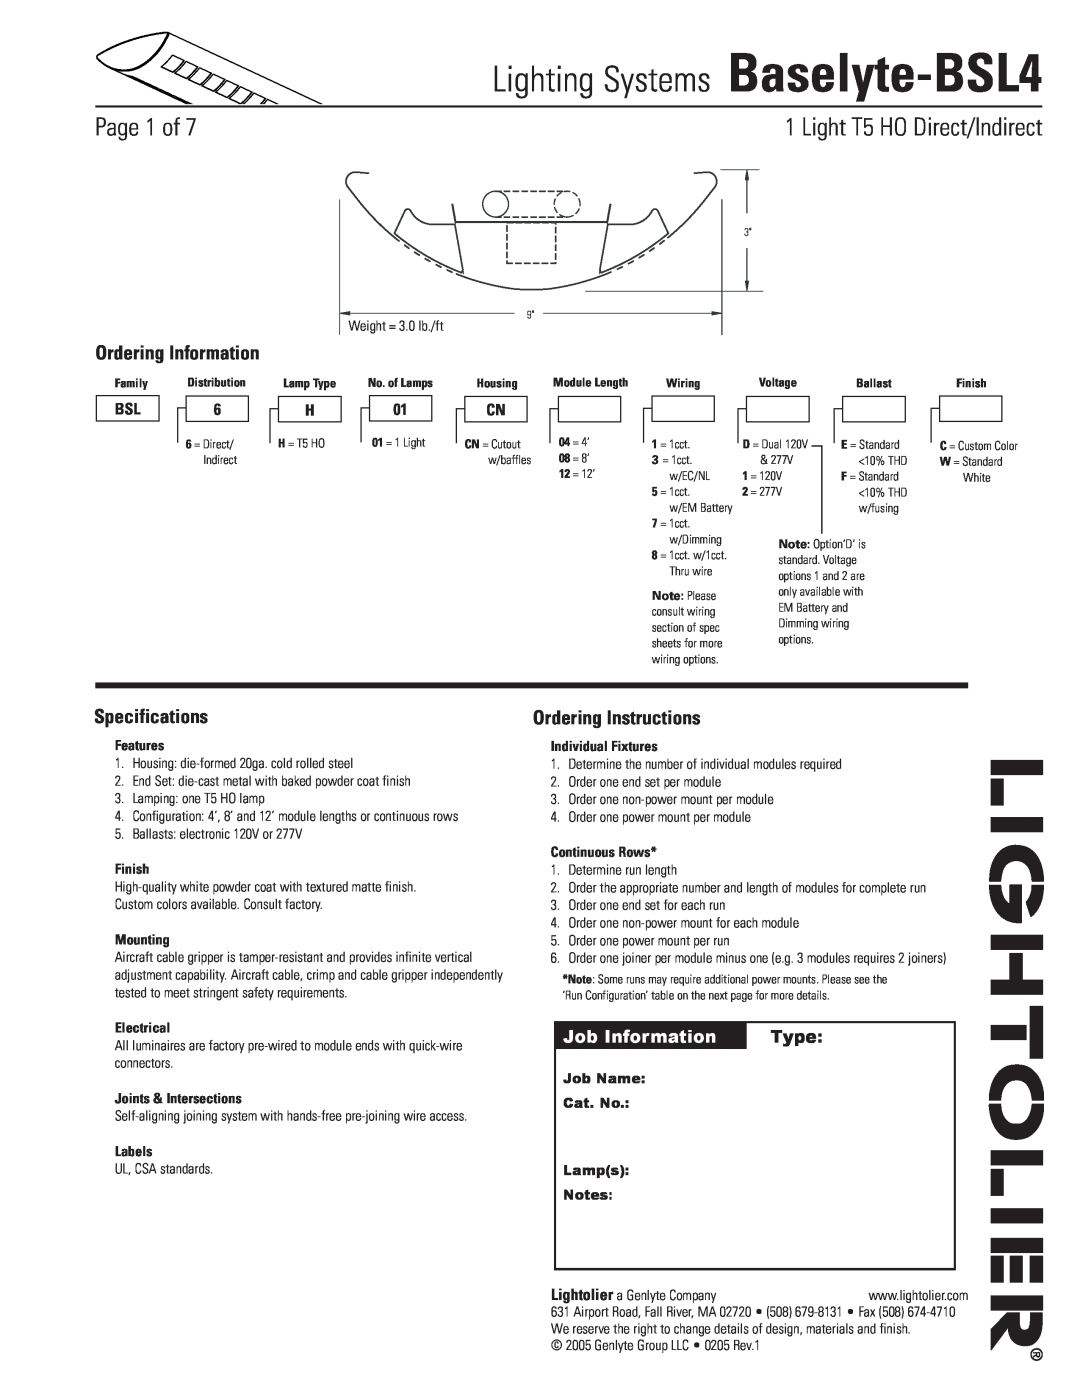 Lightolier specifications Lighting Systems Baselyte-BSL4, Page  of,  Light T5 HO Direct/Indirect, Specifications 